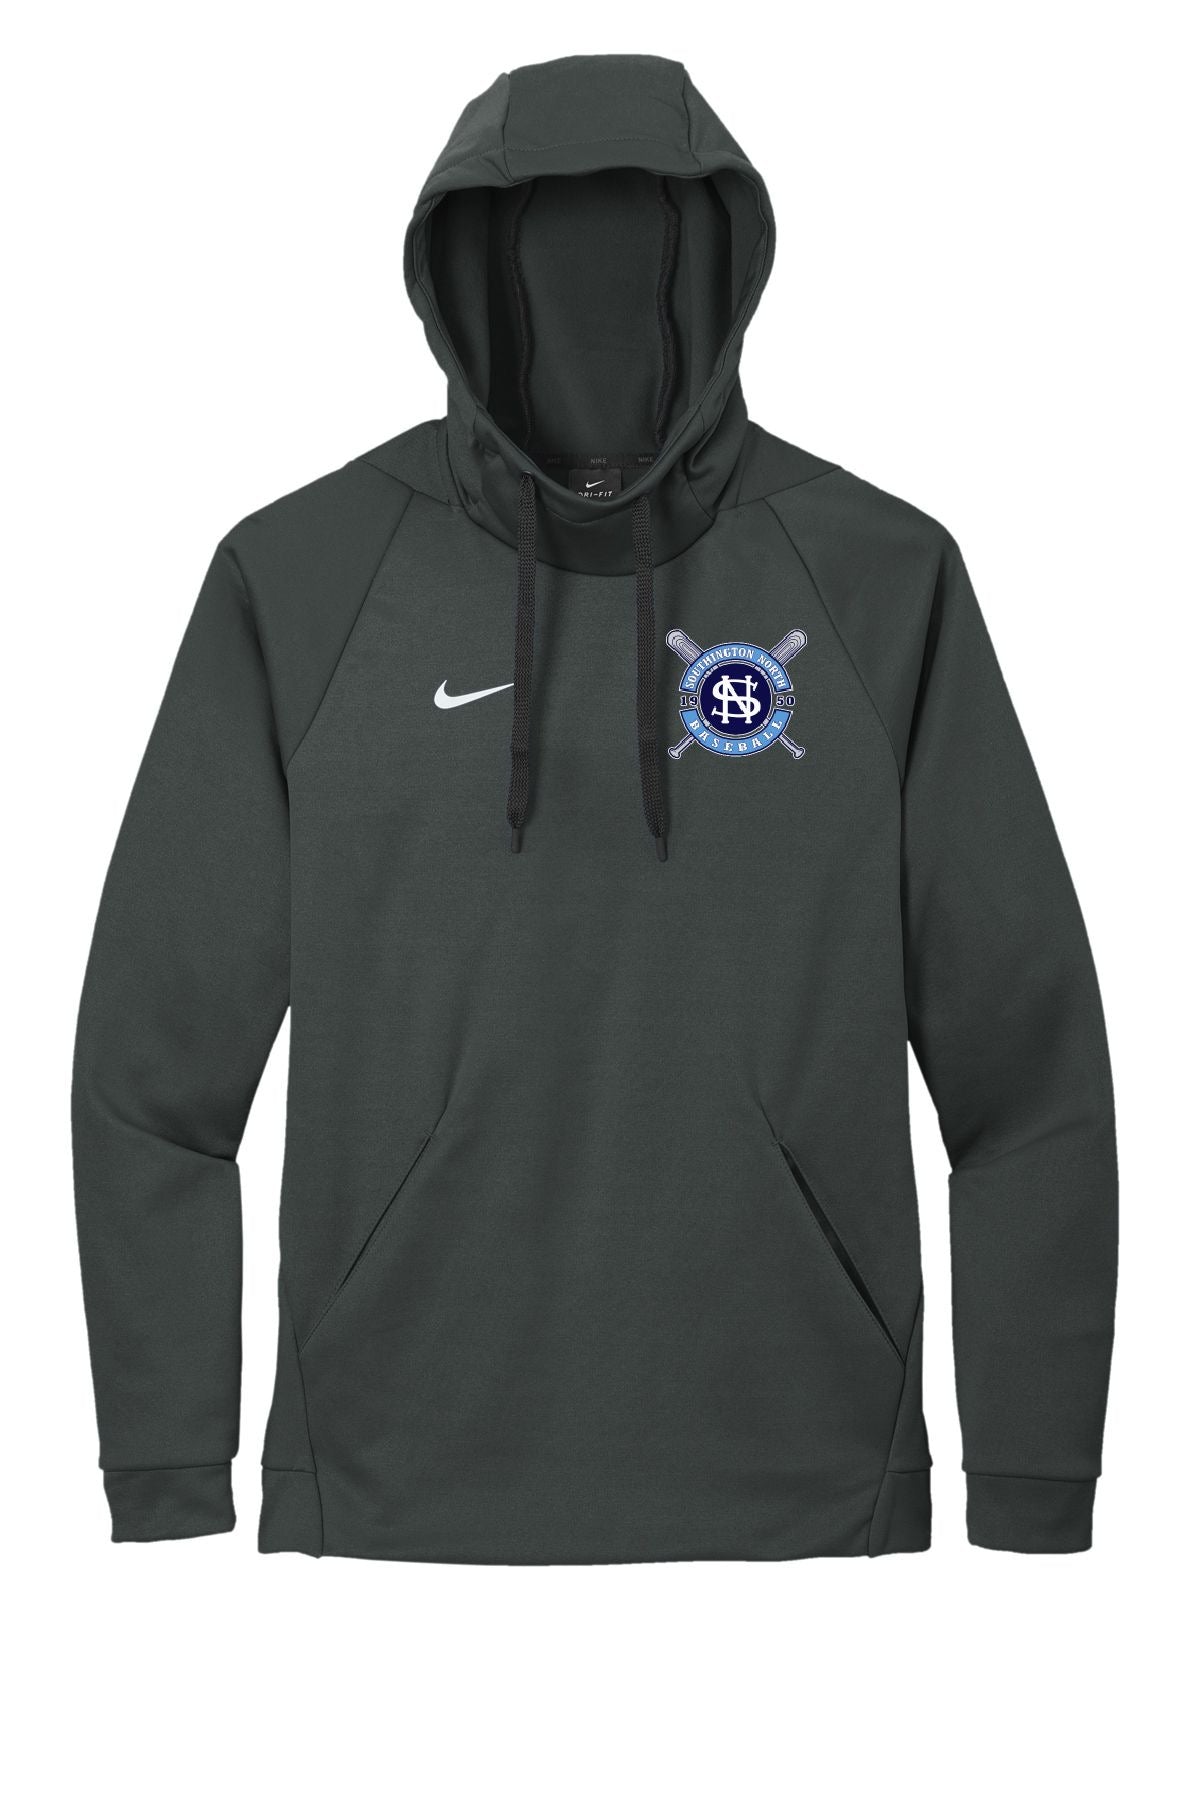 SNLL Nike Therma-FIT Pullover Fleece Hoodie